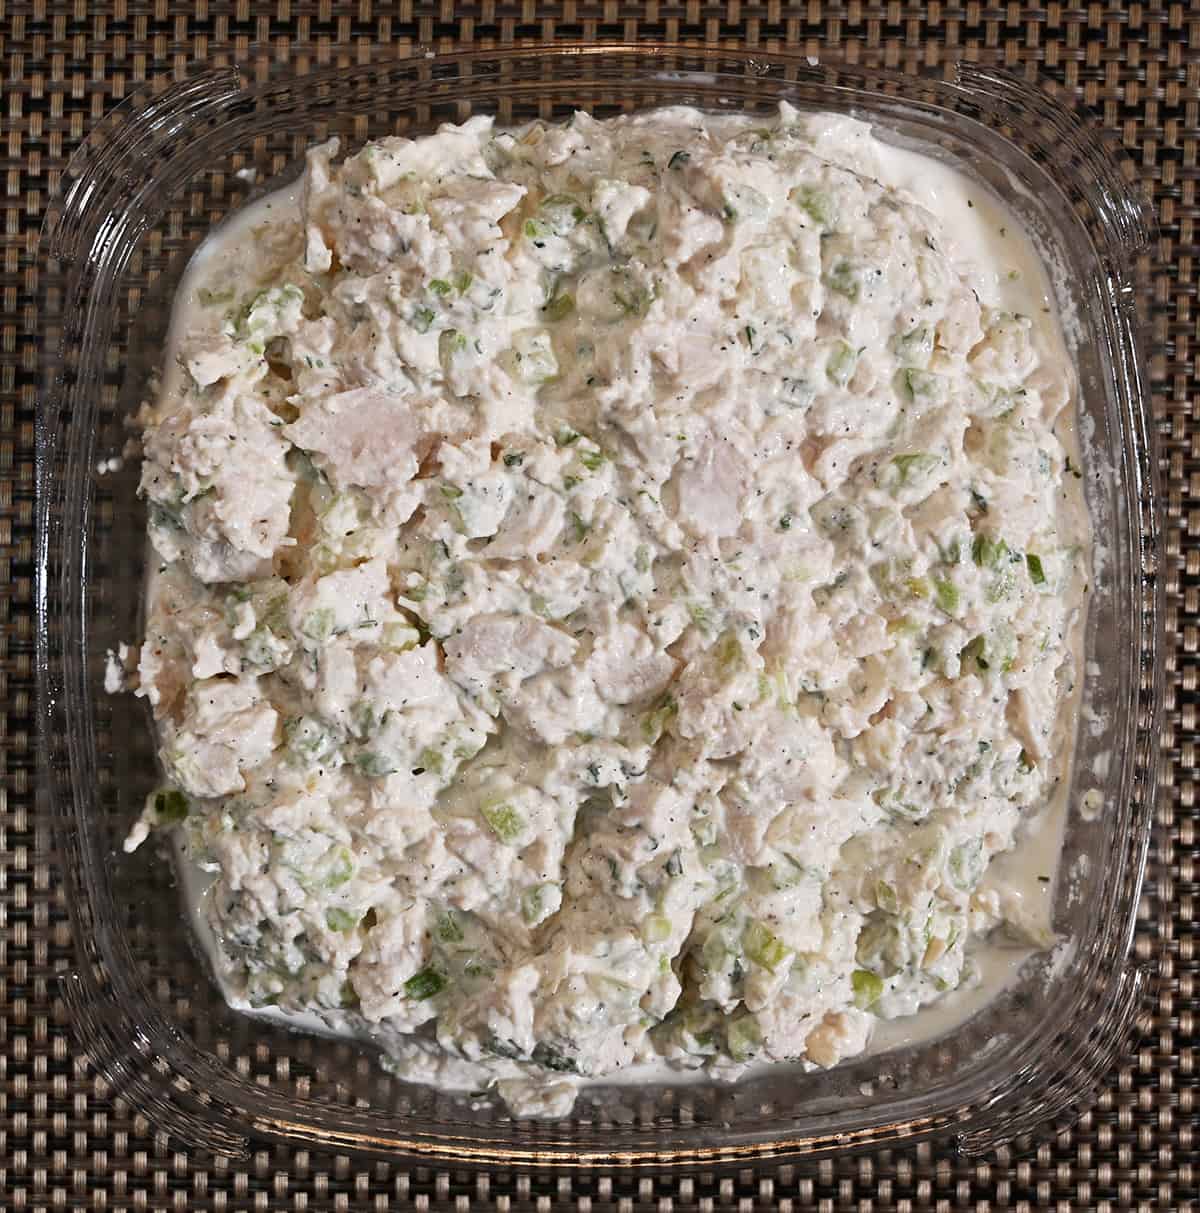 Top down image of an open container of the Costco Kirkland Signature Chicken Salad showing what the salad looks like.